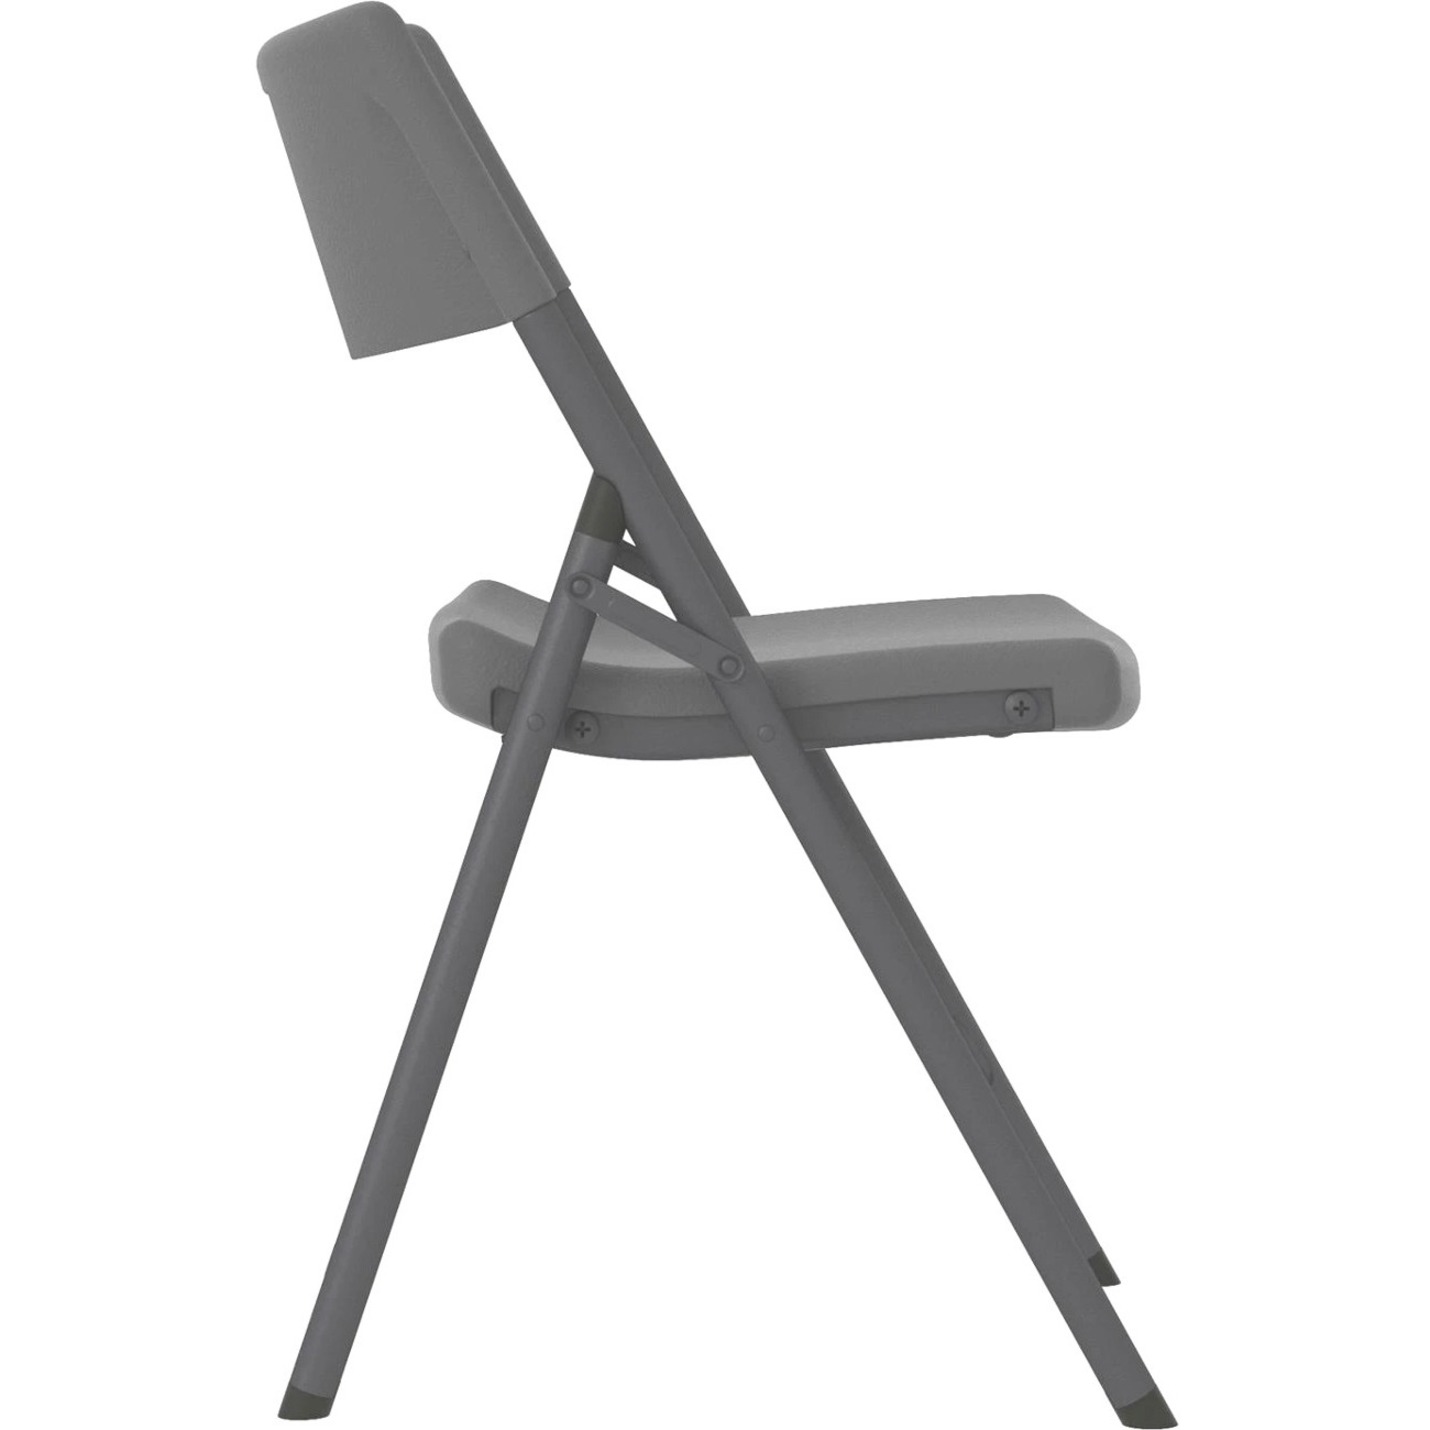 Dorel Industries CSC60410SGY4E Folding Chair, Gray - Pack of 4 - image 2 of 7